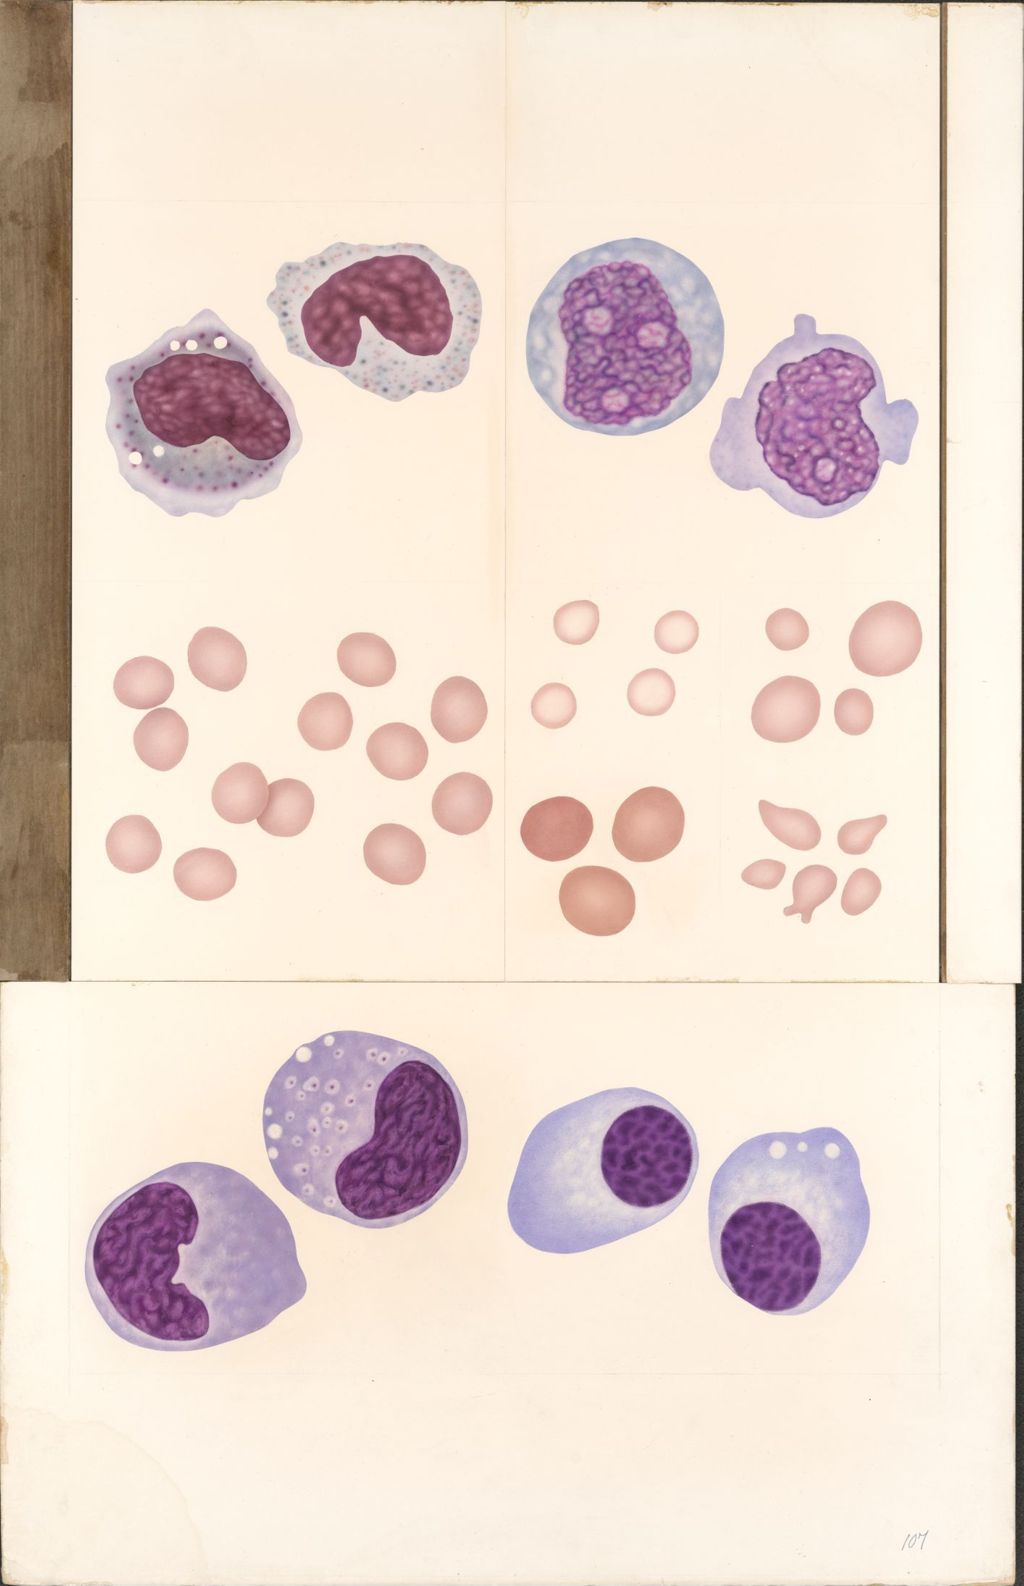 Miniature of Medical Profiles, Normal and Abnormal Blood Cells Seen In Peripheral Blood, Plate II